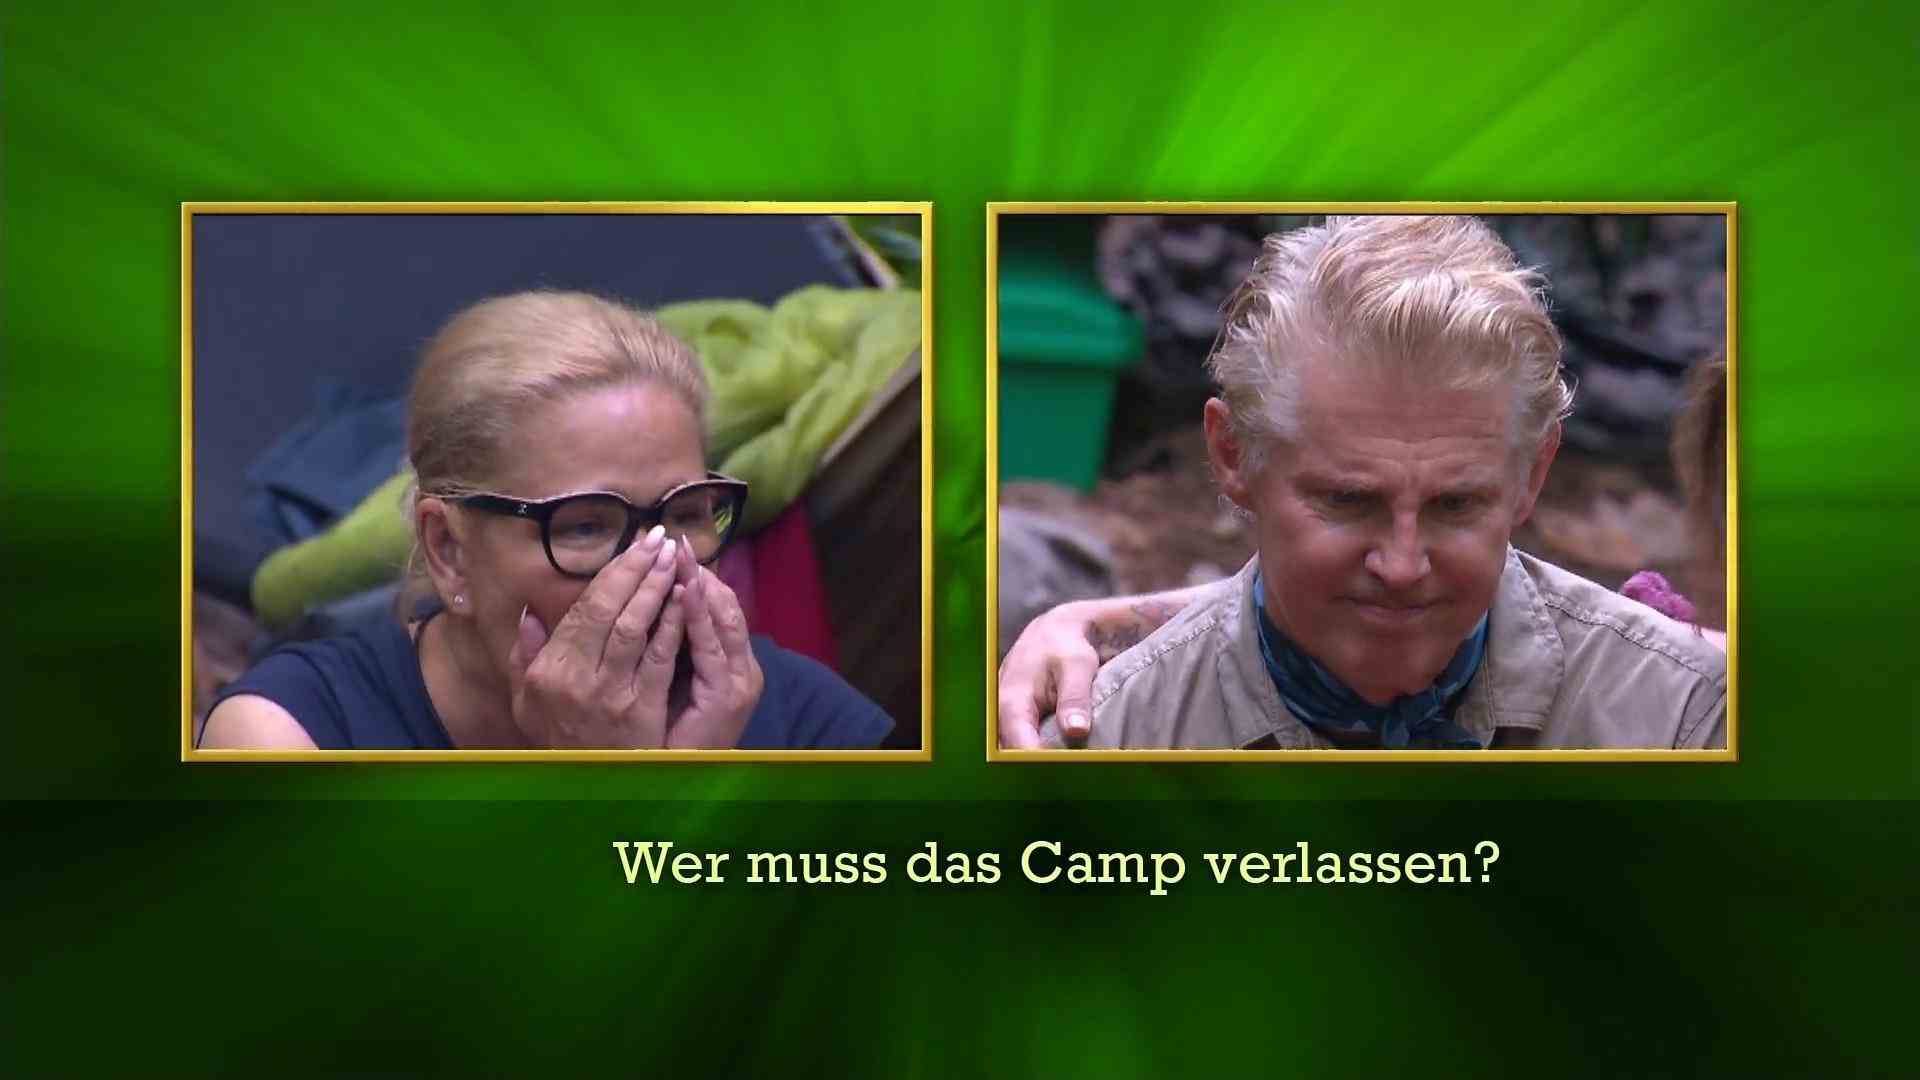 Markus Mörl has to leave the jungle camp The second celebrity is thrown out